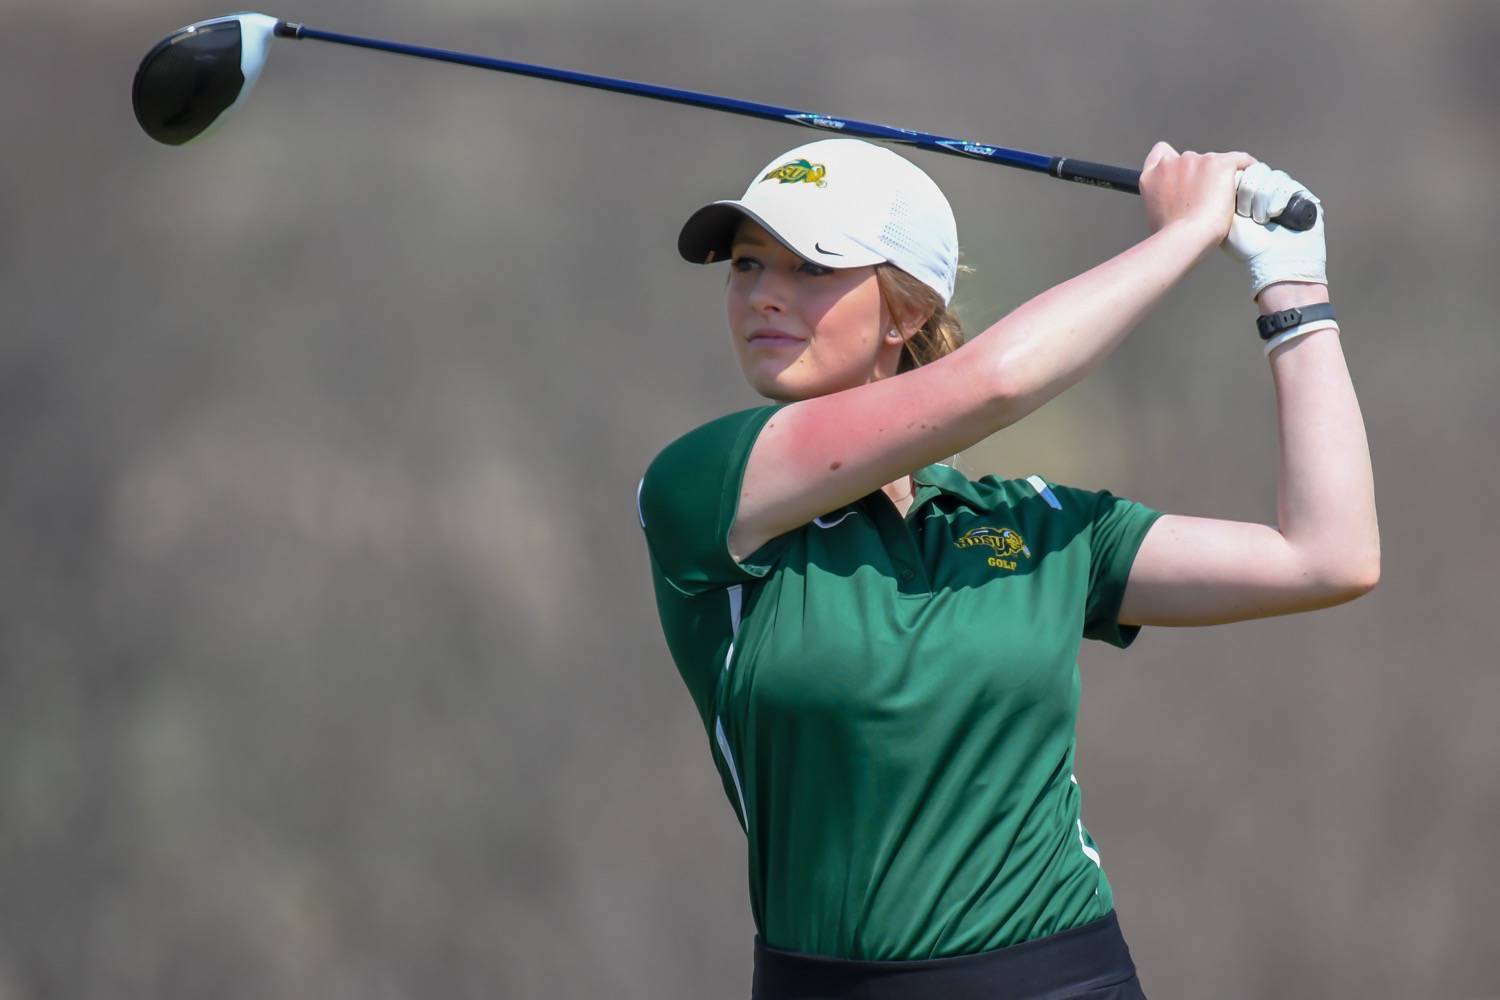 Are You A Bison Women's Golf Scholar?